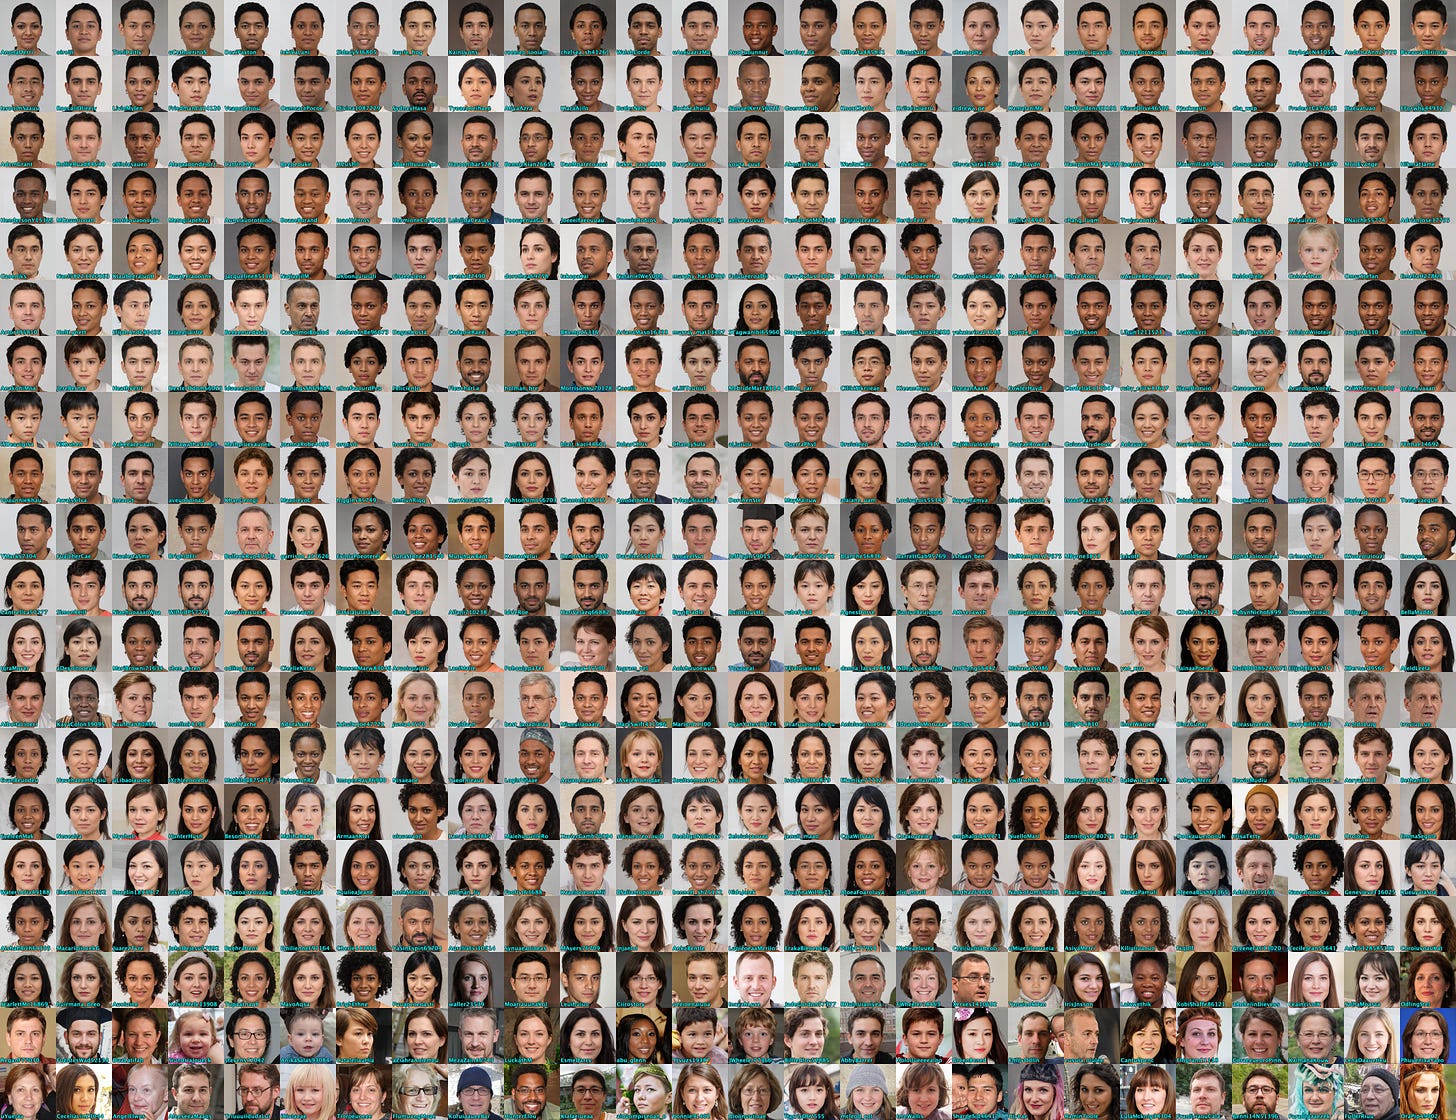 grid of the profile images of the 520 spam accounts with GAN-generated faces